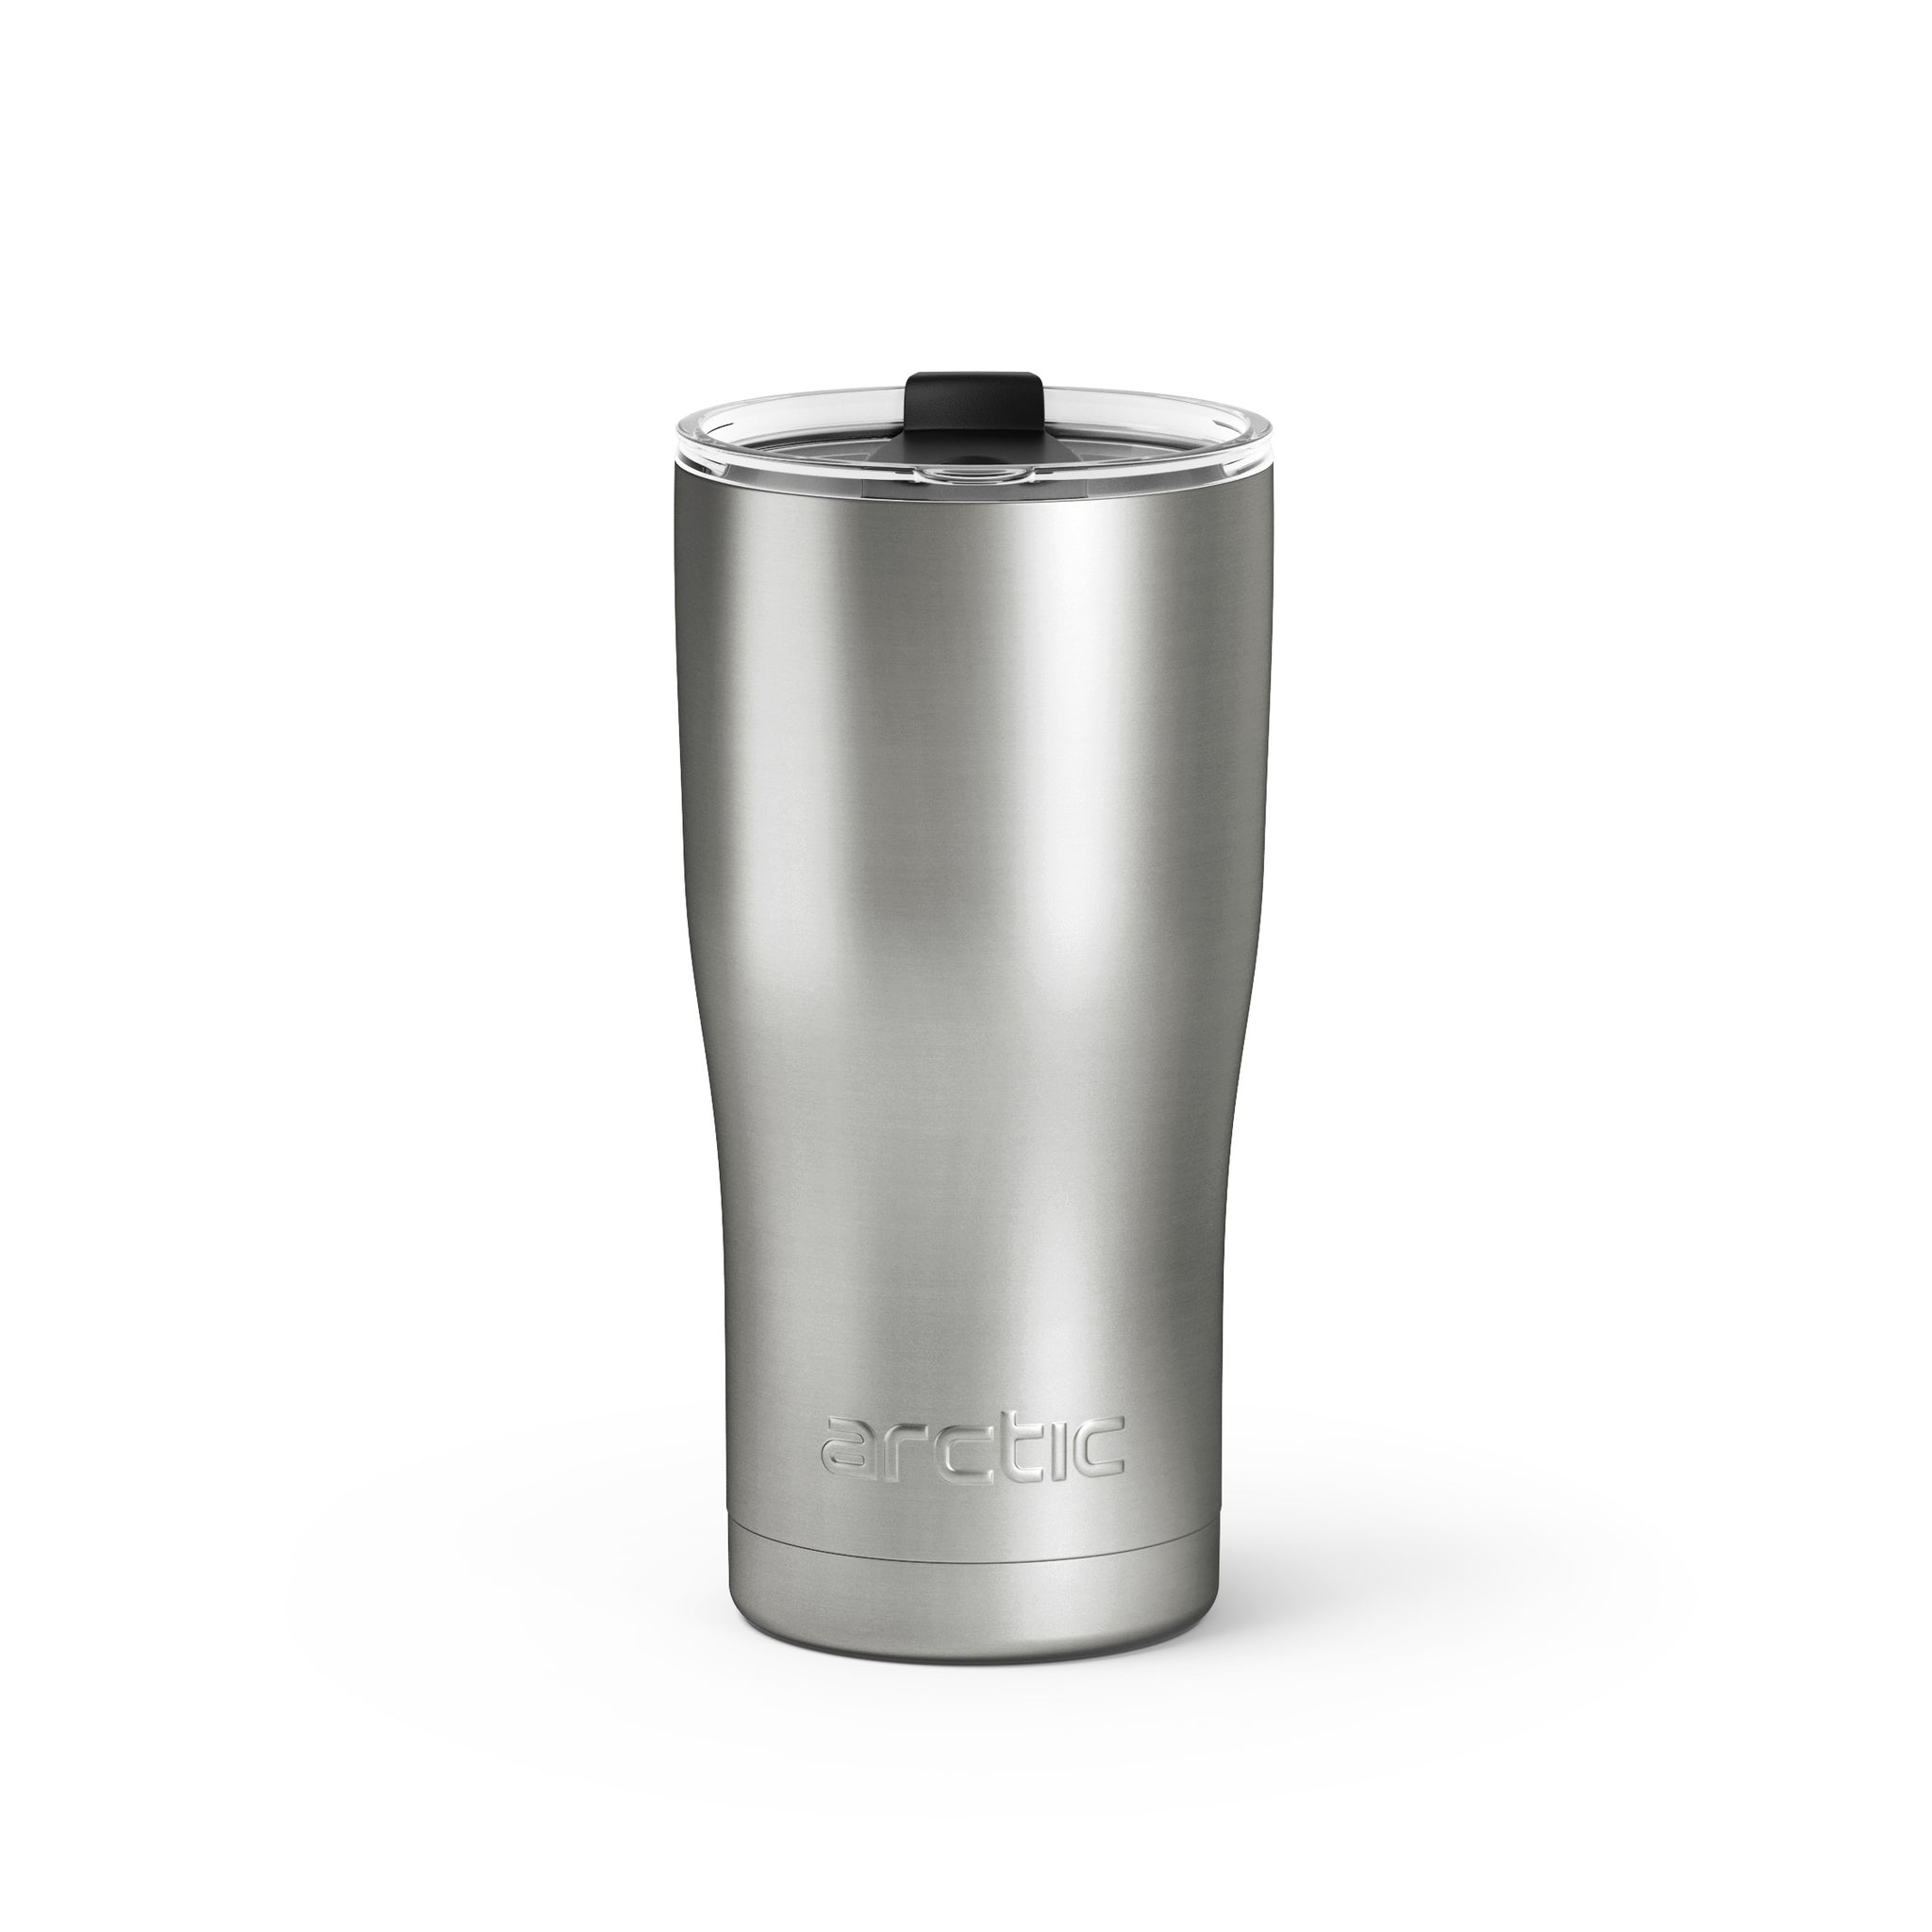 Stainless-Steel Tumblers Keep Drinks Cold (or Hot) - Food & Nutrition  Magazine